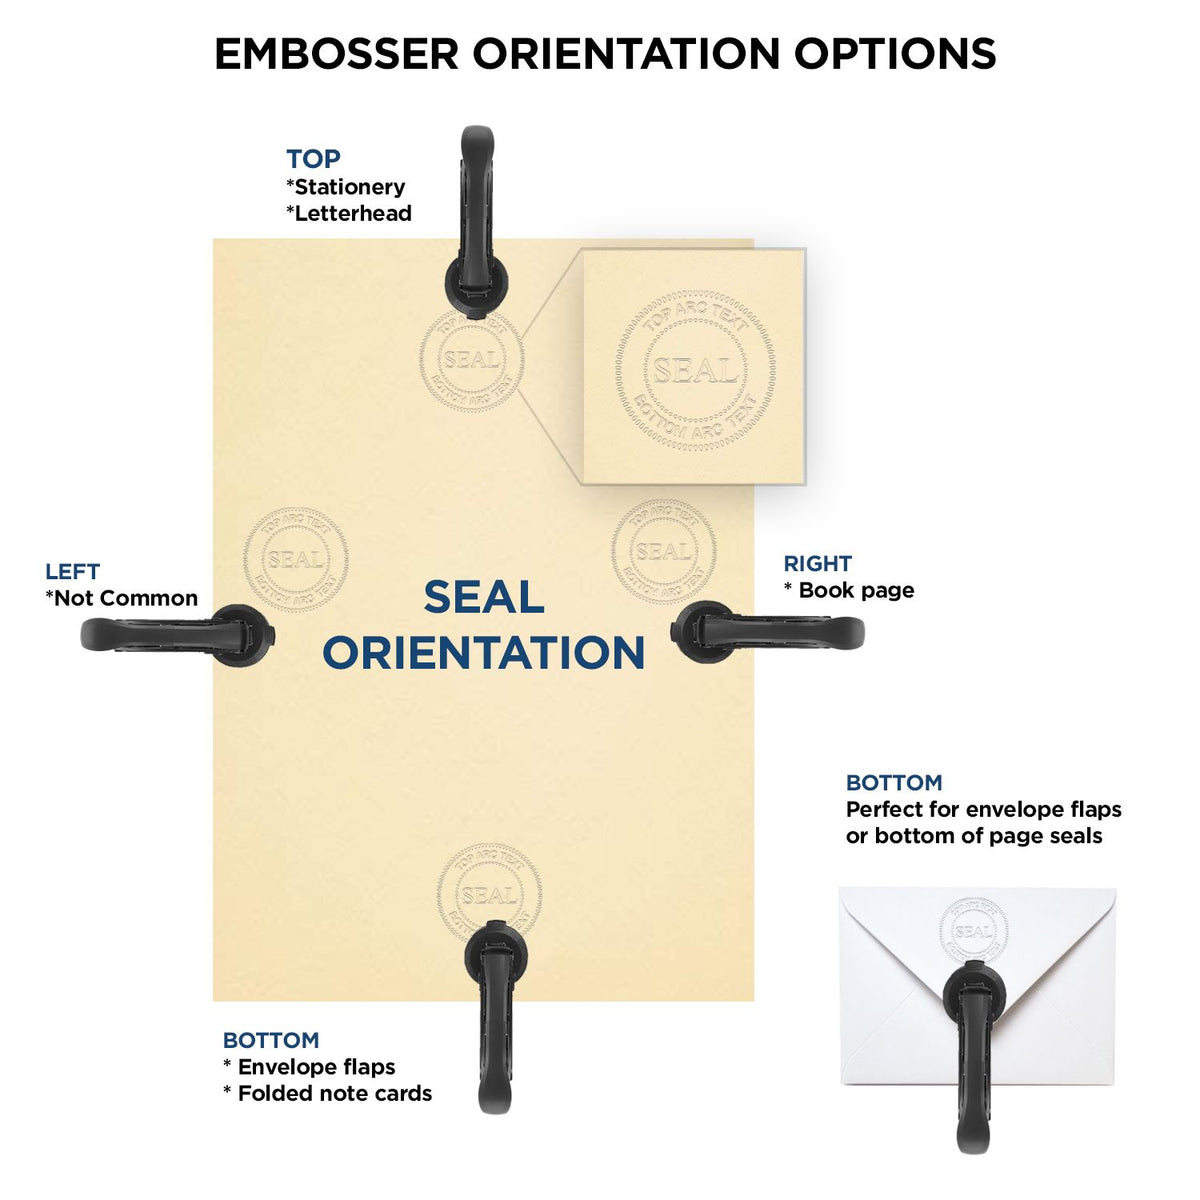 An infographic for the State of Idaho Long Reach Architectural Embossing Seal showing embosser orientation, this is showing examples of a top, bottom, right and left insert.